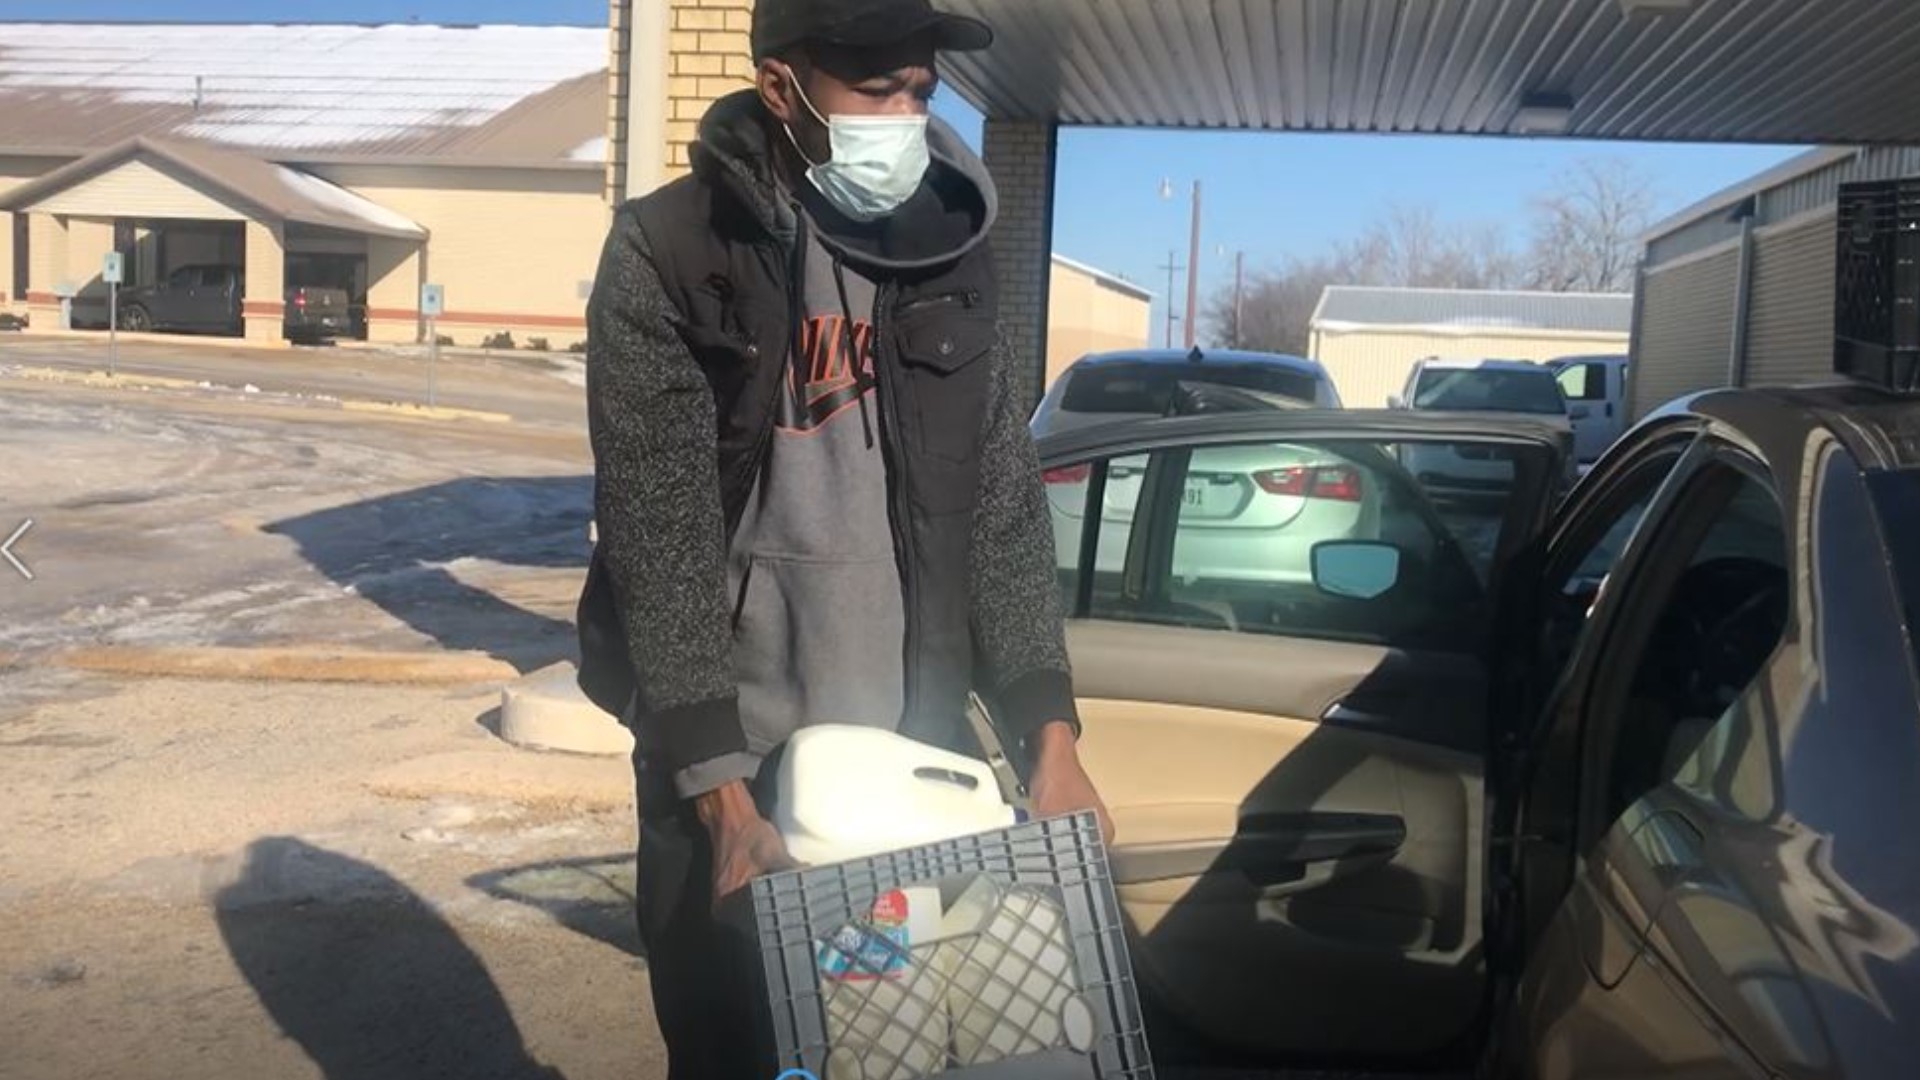 Not only has he delivered water since Sunday, but he has also given rides to the warming stations for anyone who needs it.